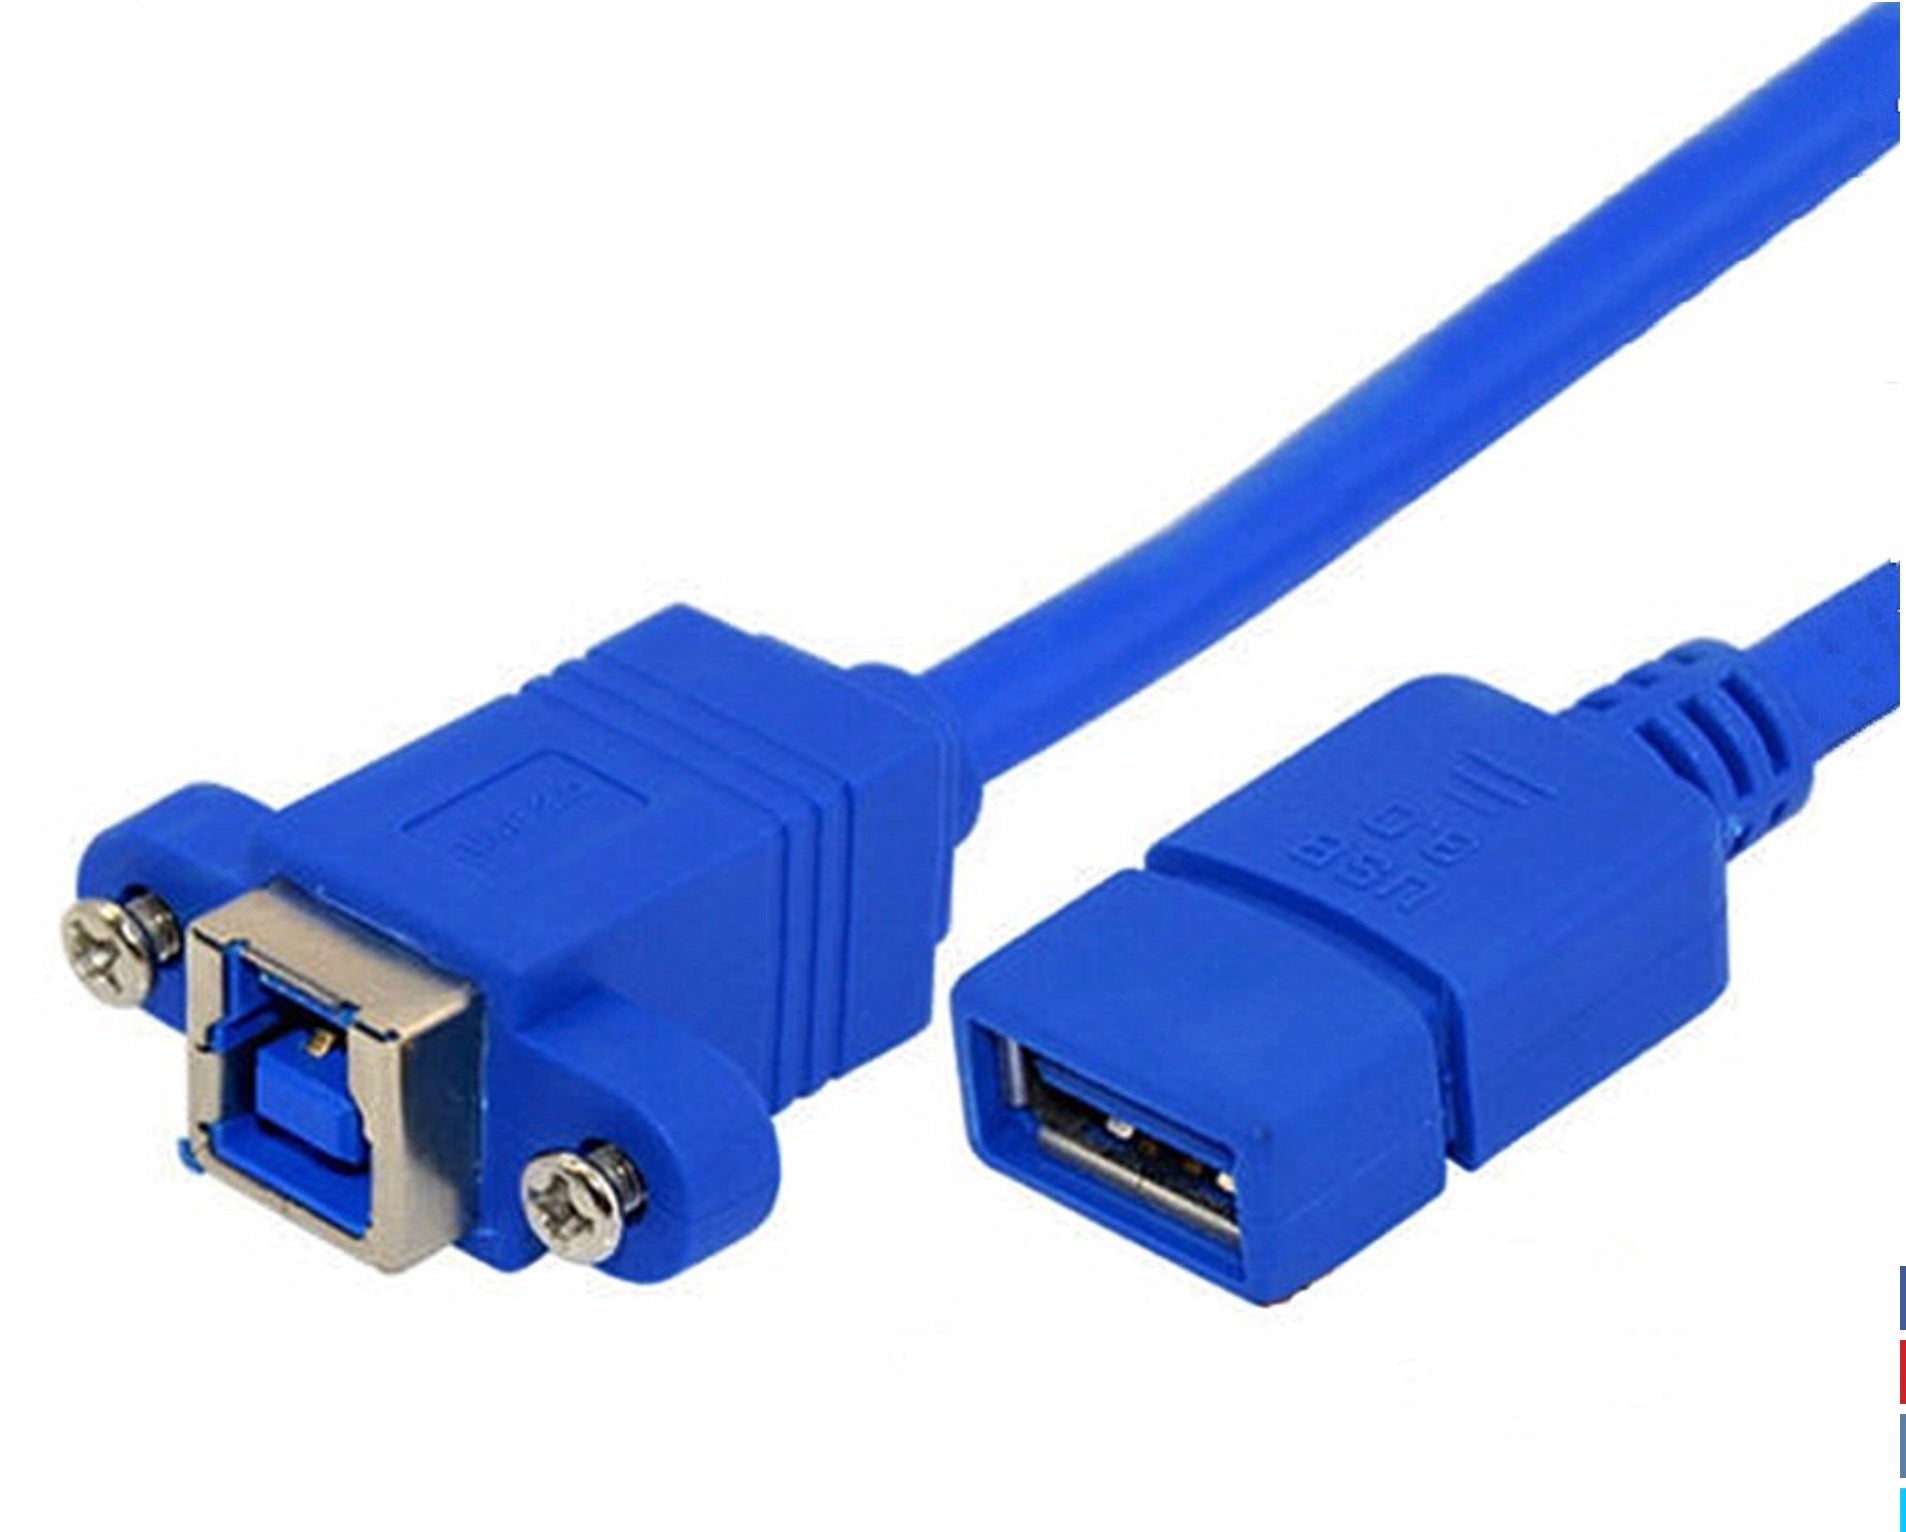 USB 3.0 Type A Female to USB 3.0 Type B Panel Mount Female Data Sync Cable 0.3m